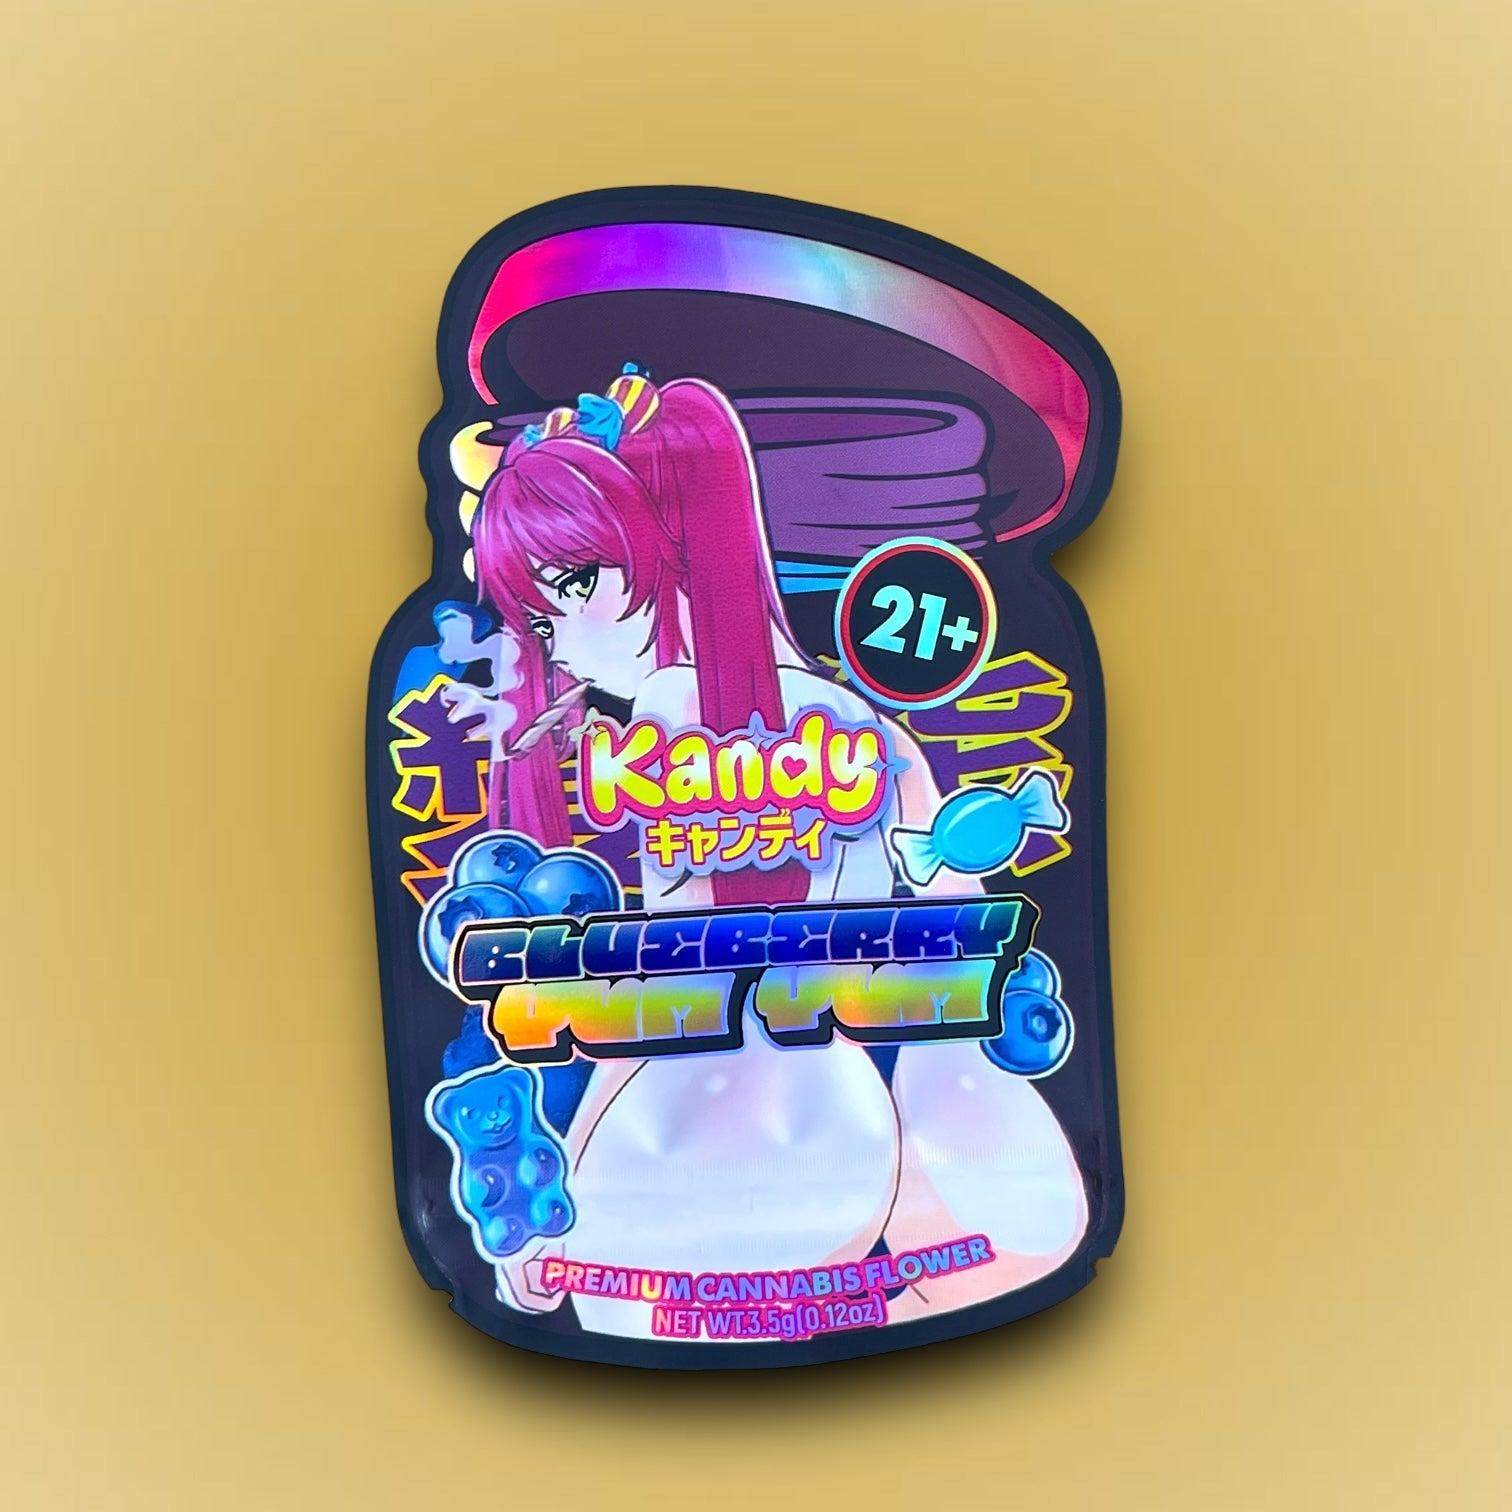 Kandy Blueberry Yum Yum 3.5G Mylar Bags Holographic cut out